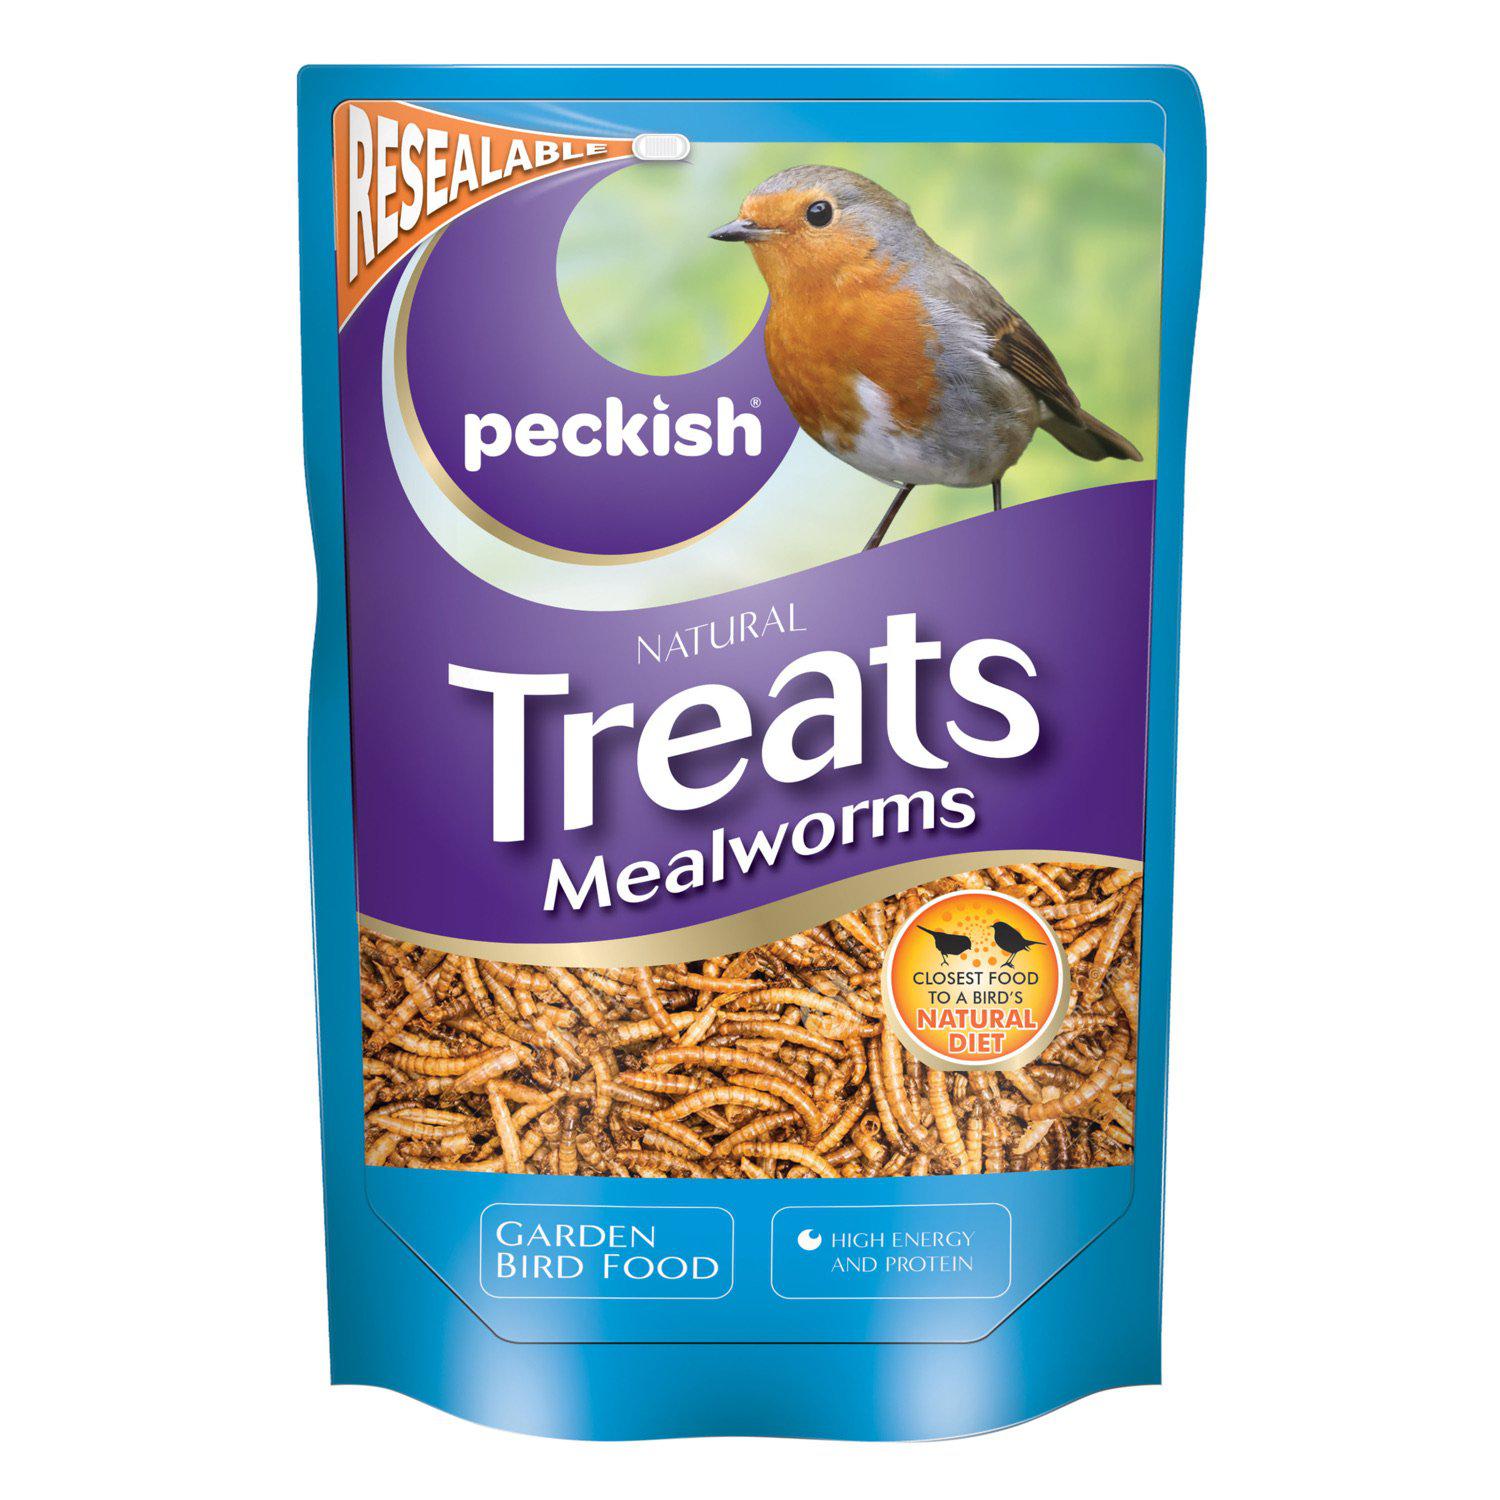 Peckish Mealworms